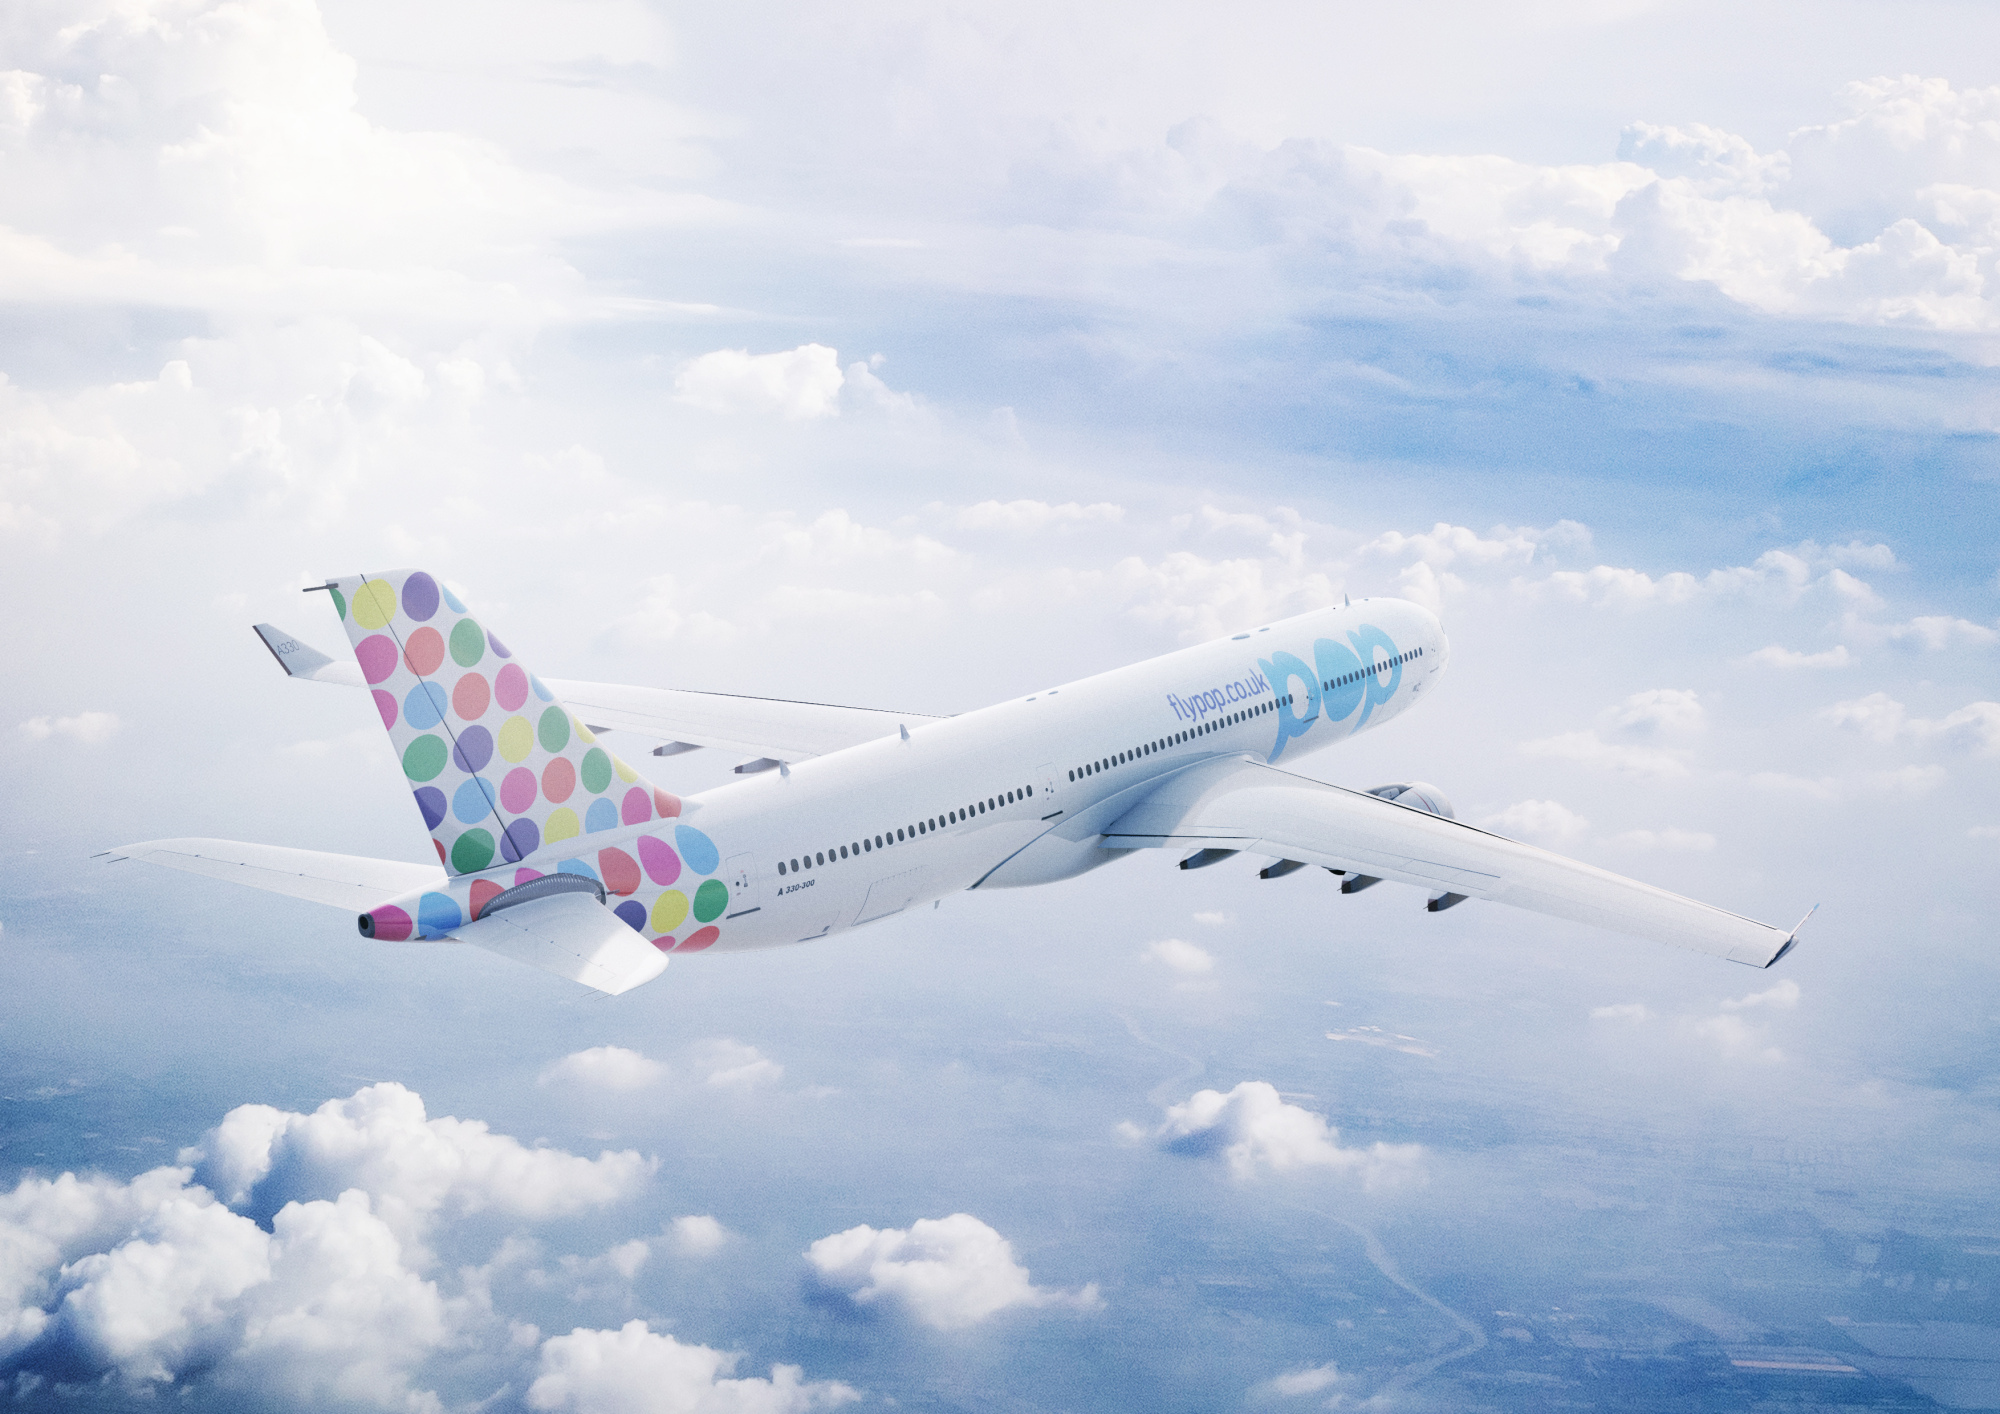 An artist's impression showing the livery of POP Airline.
